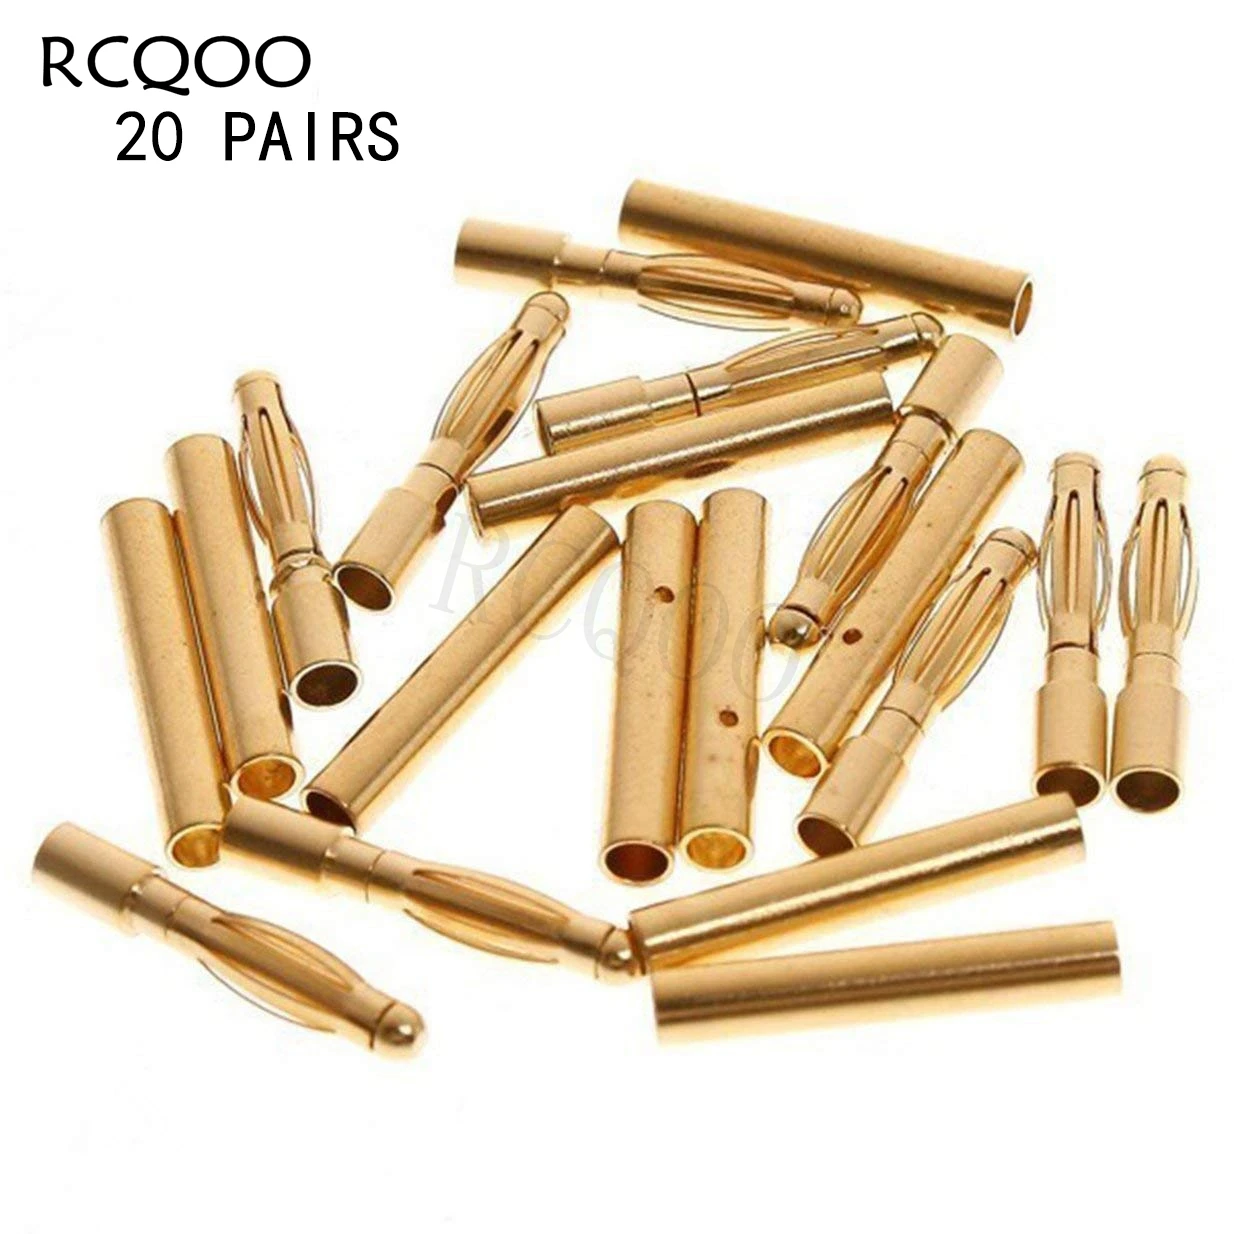 

20 Pairs 2.0 mm Plated Male and Female Gold Bullet 2mm Banana Connector Plugs for RC Battery ESC Motor